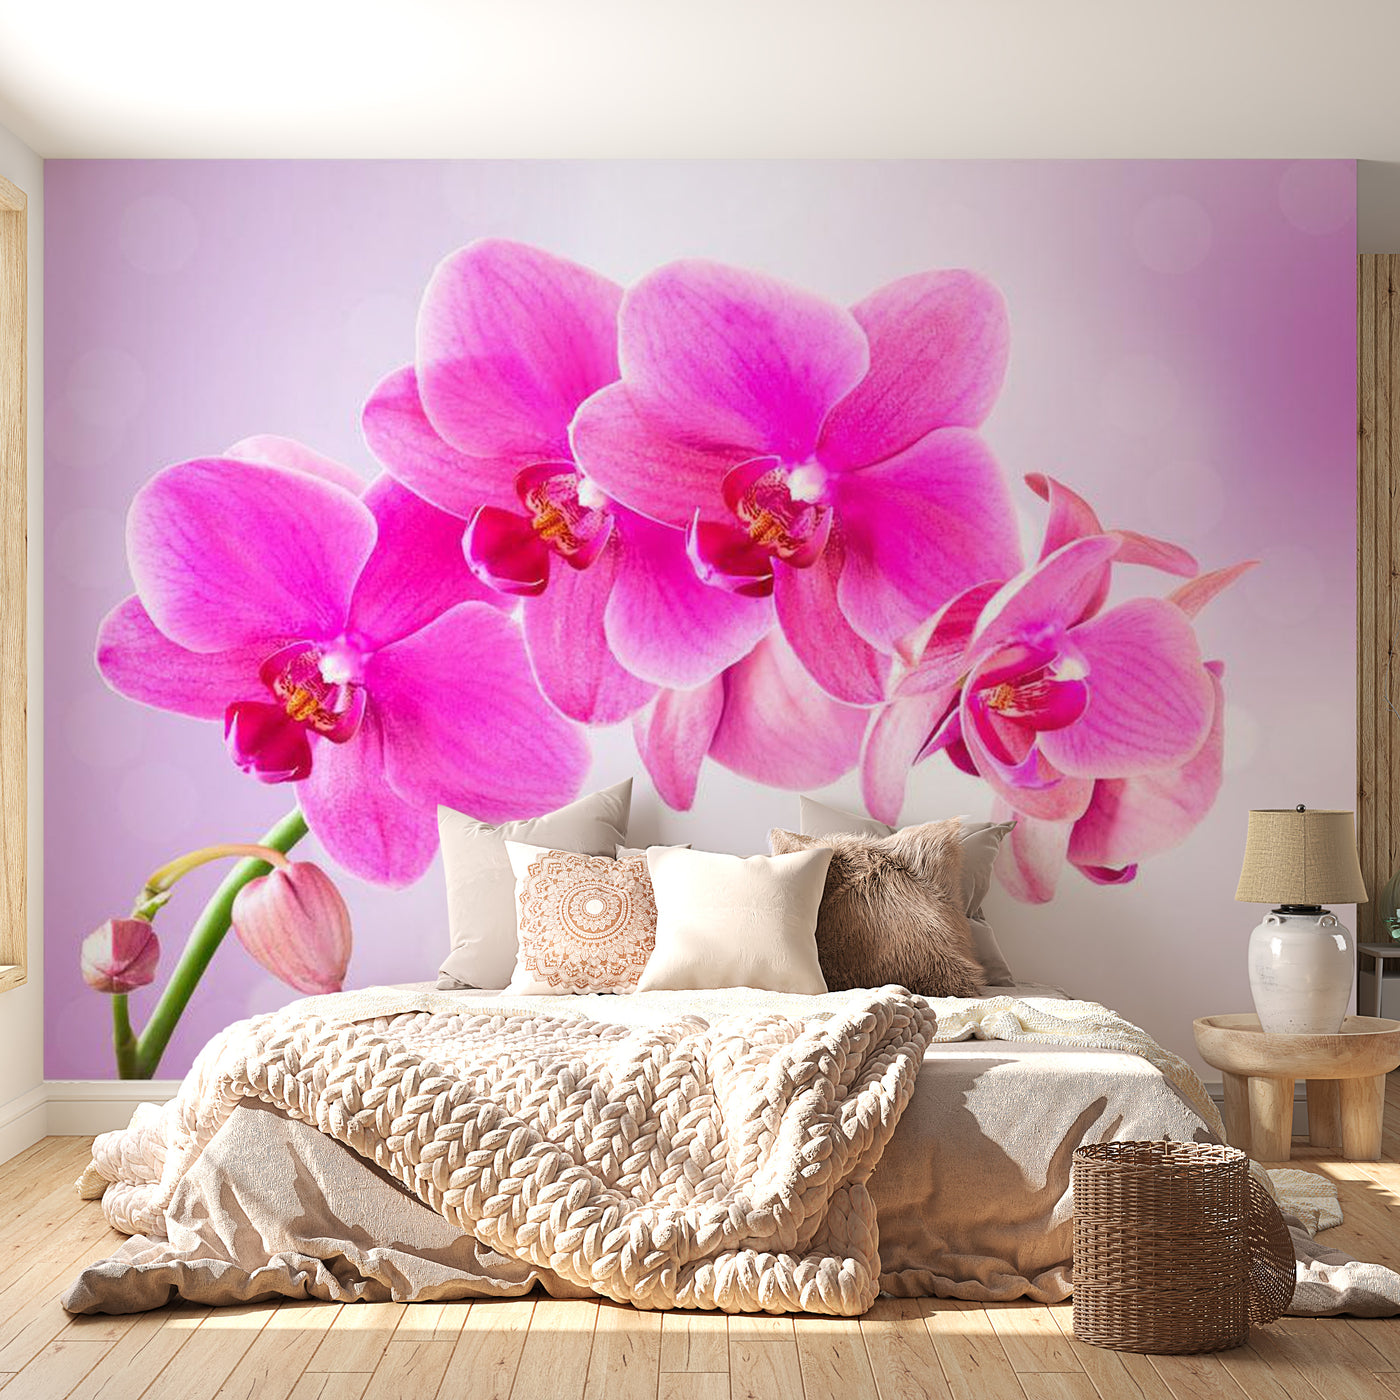 Peel & Stick Floral Wall Mural - Bright Pink Orchid - Removable Wall Decals